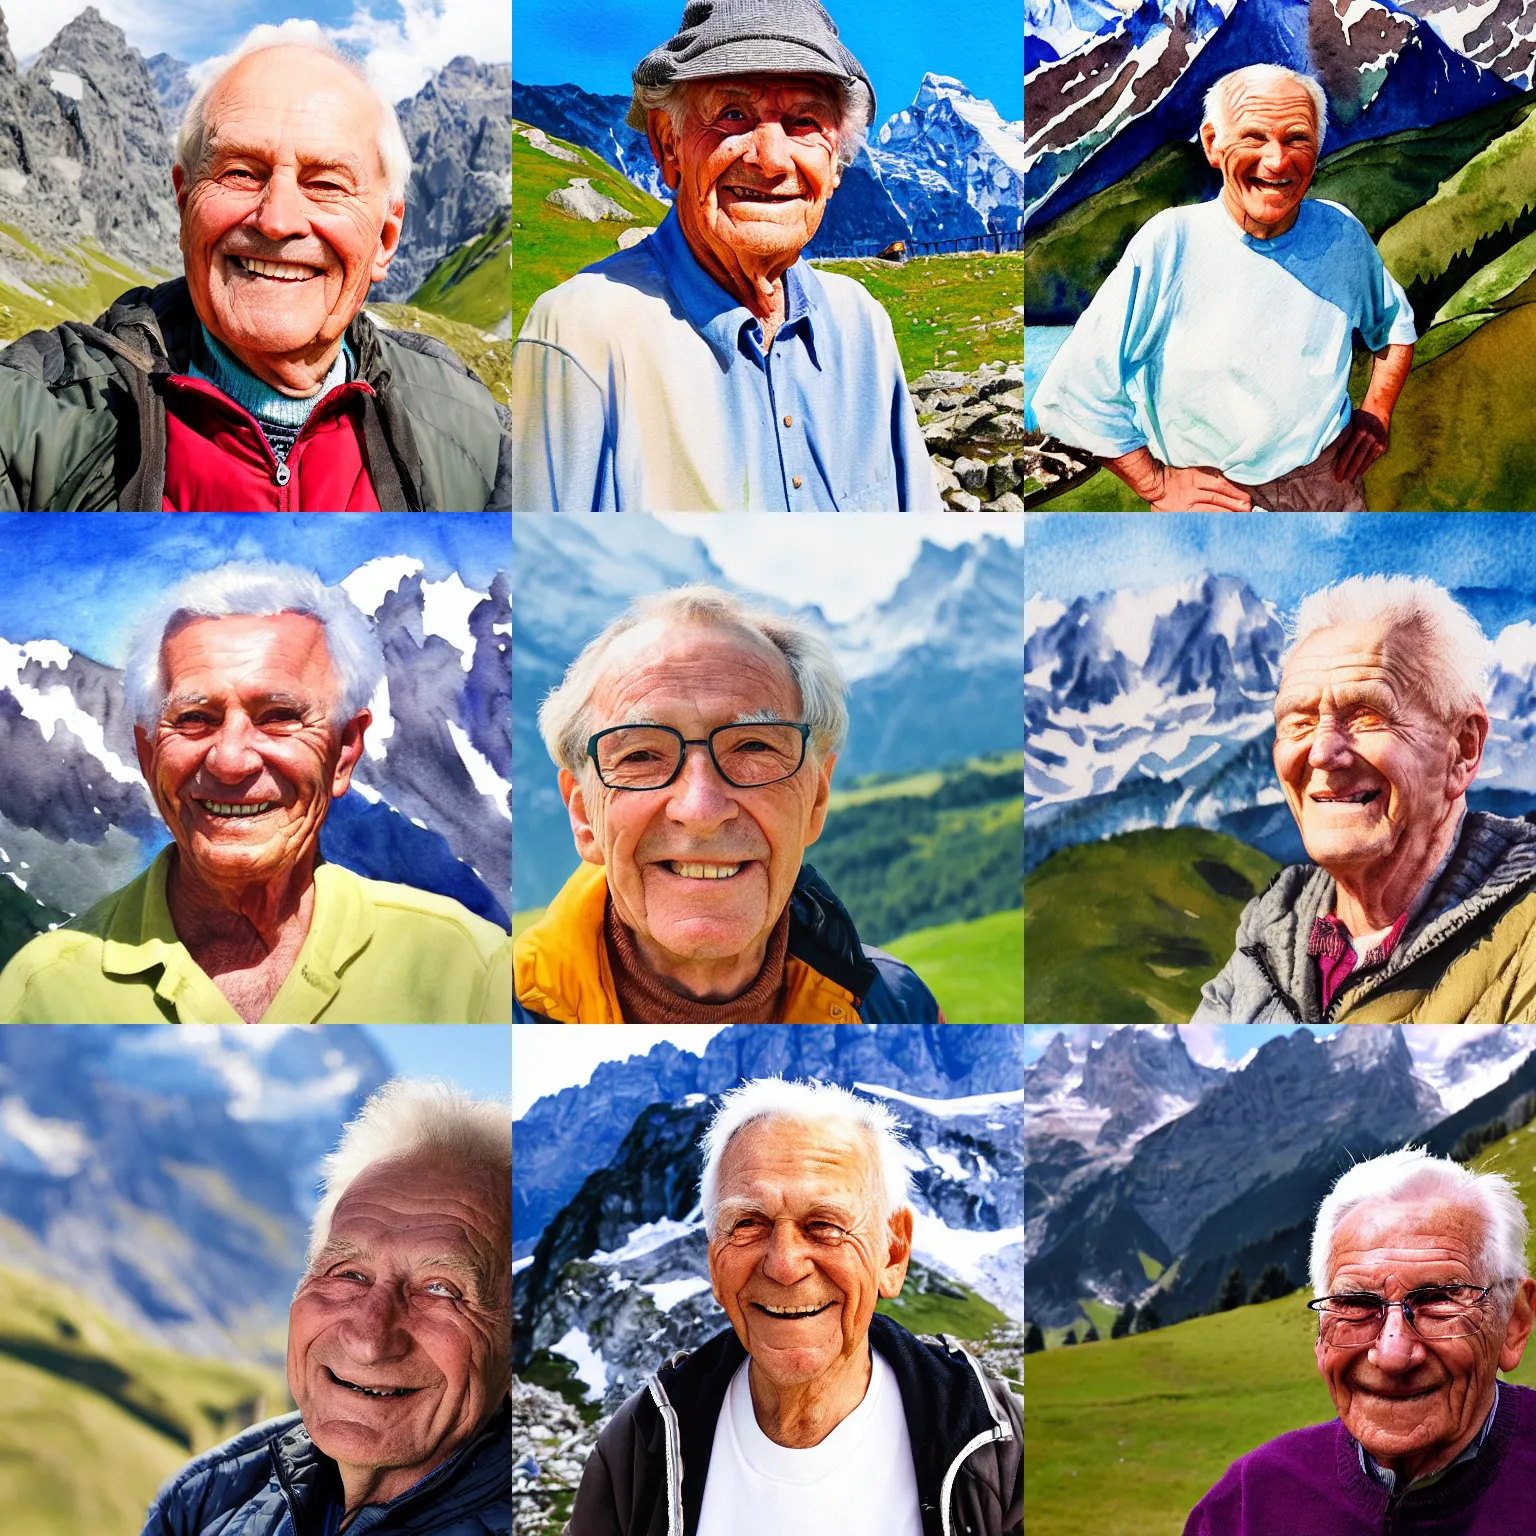 Prompt: closeup portrait of a smiling friendly elderly man, in the Swiss Alps, mountains in background, watercolor and pen